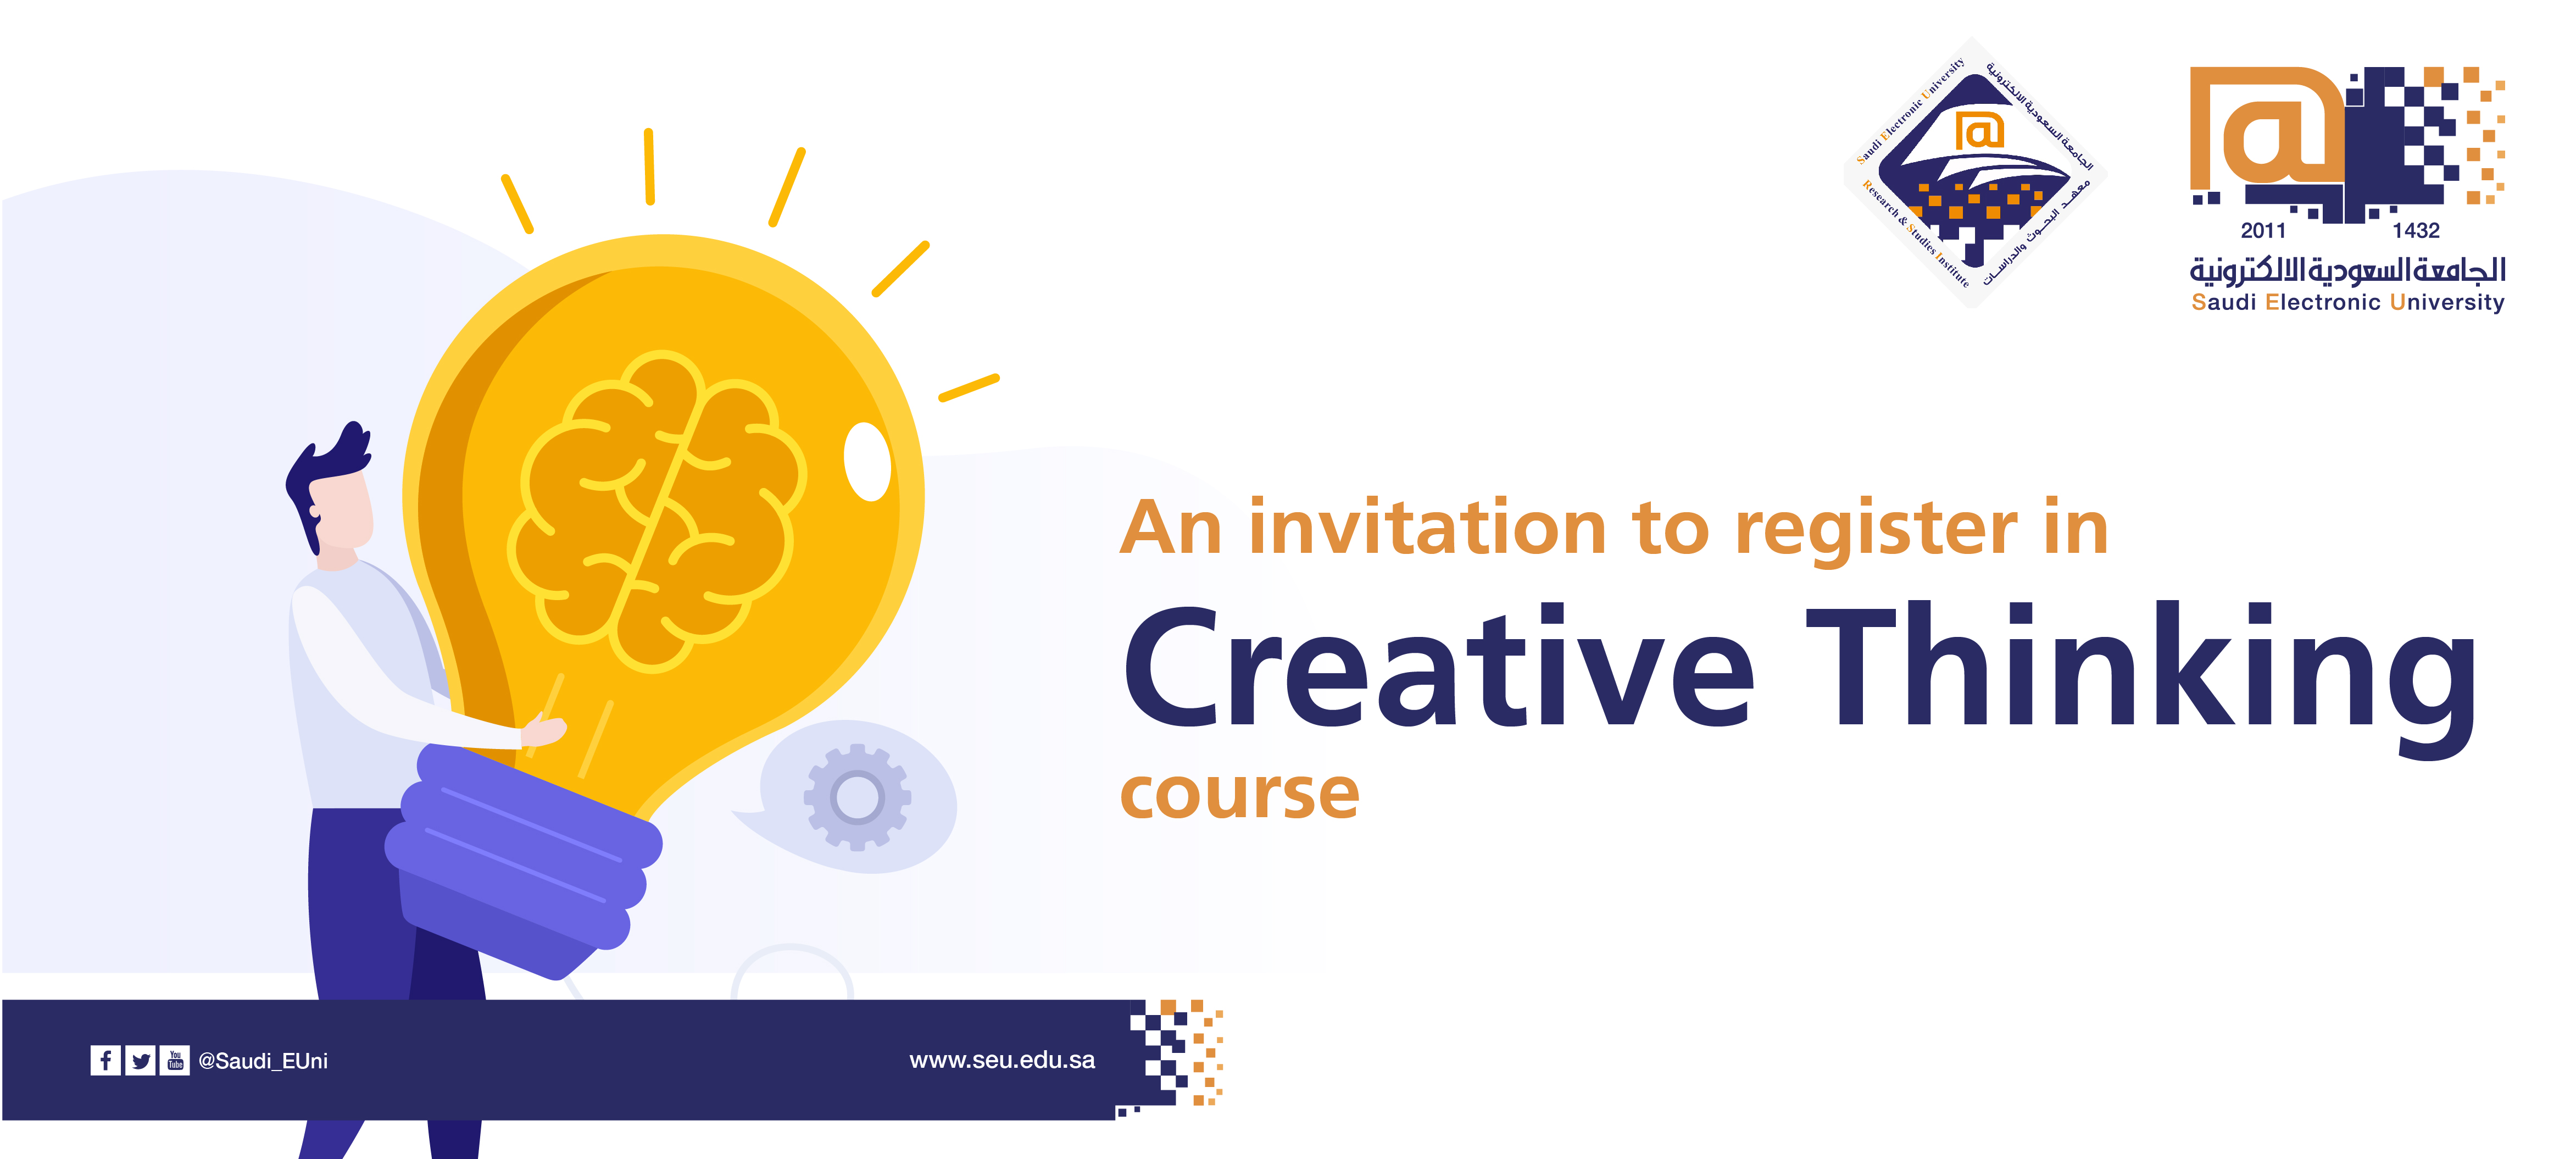 An invitation to register in "Creative Thinking" course